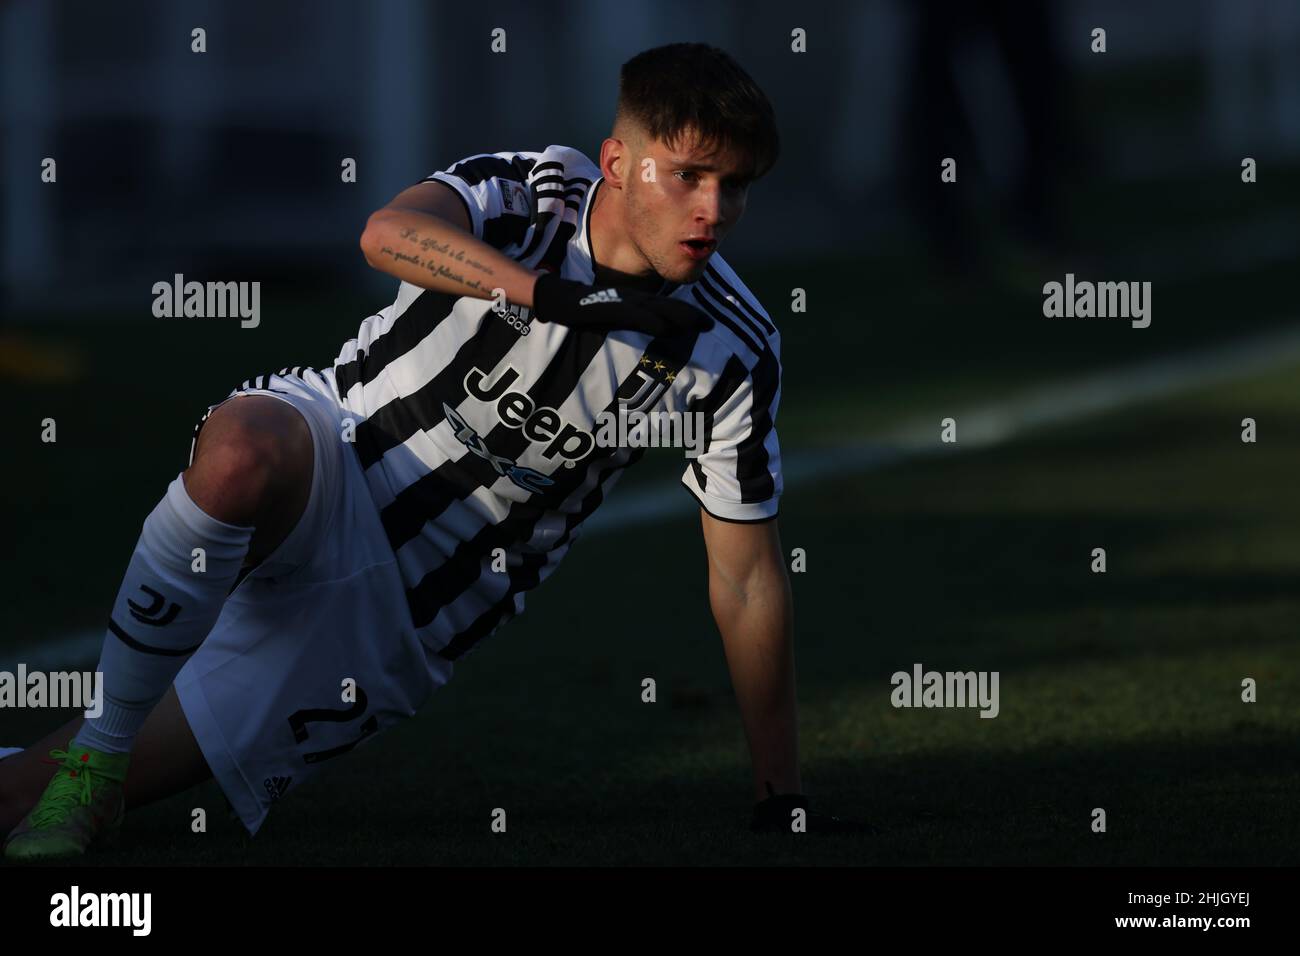 OFFICIAL: Juventus B team will play in Serie C 